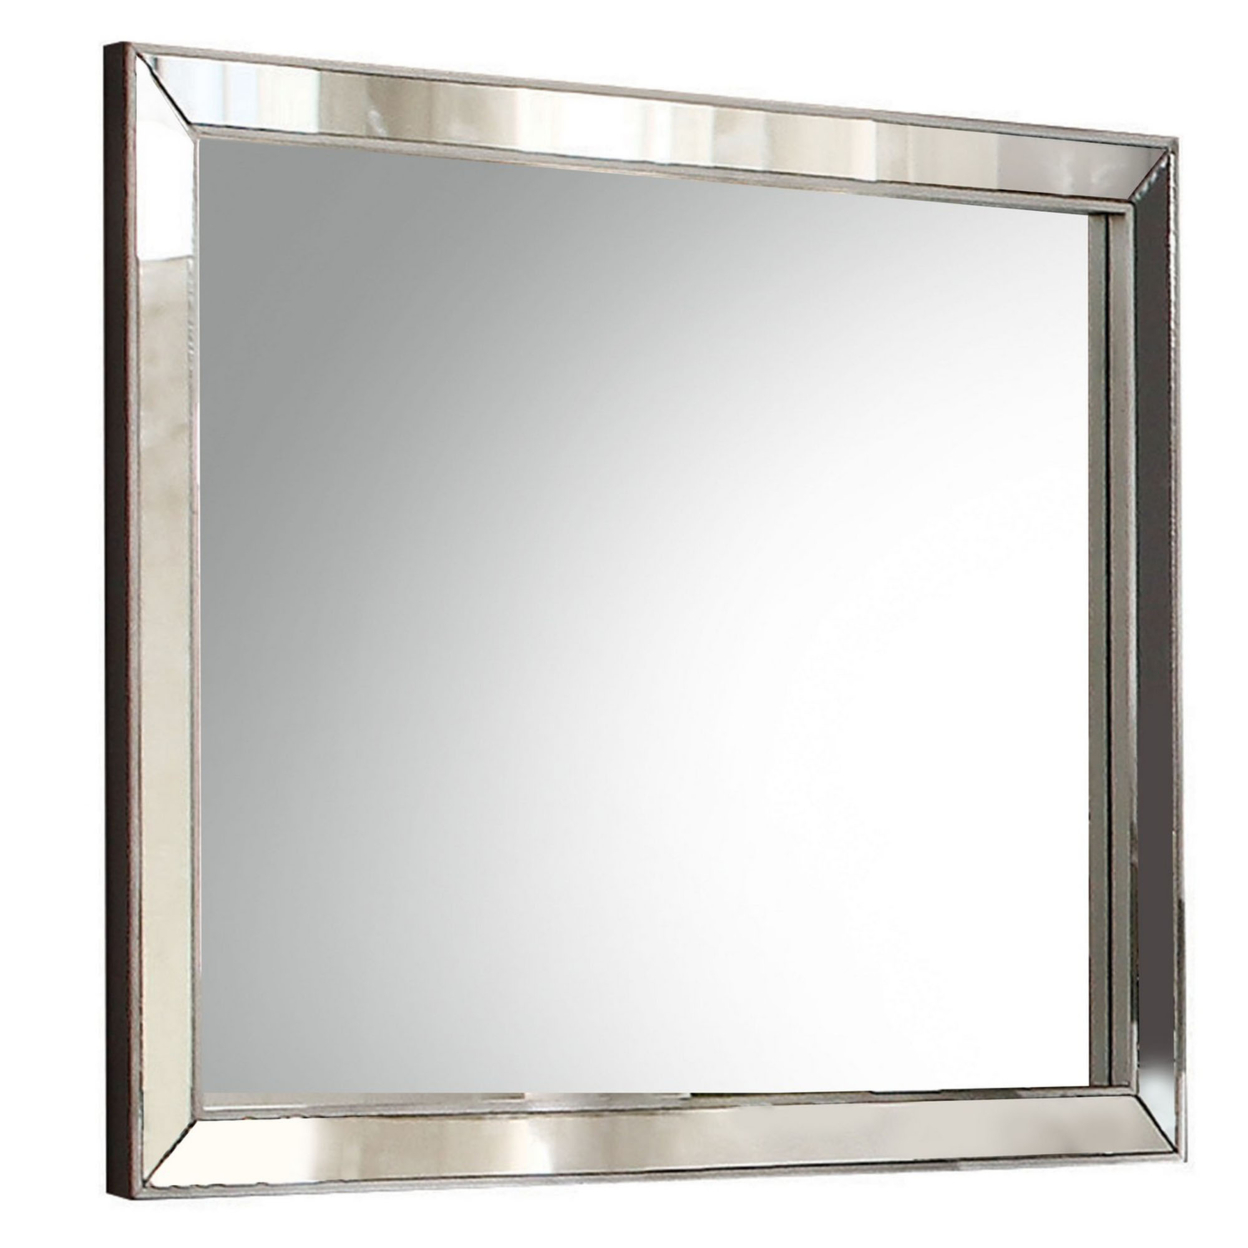 Wooden Wall Mirror With Beveled Edges And Mounting Hardware, Silver- Saltoro Sherpi